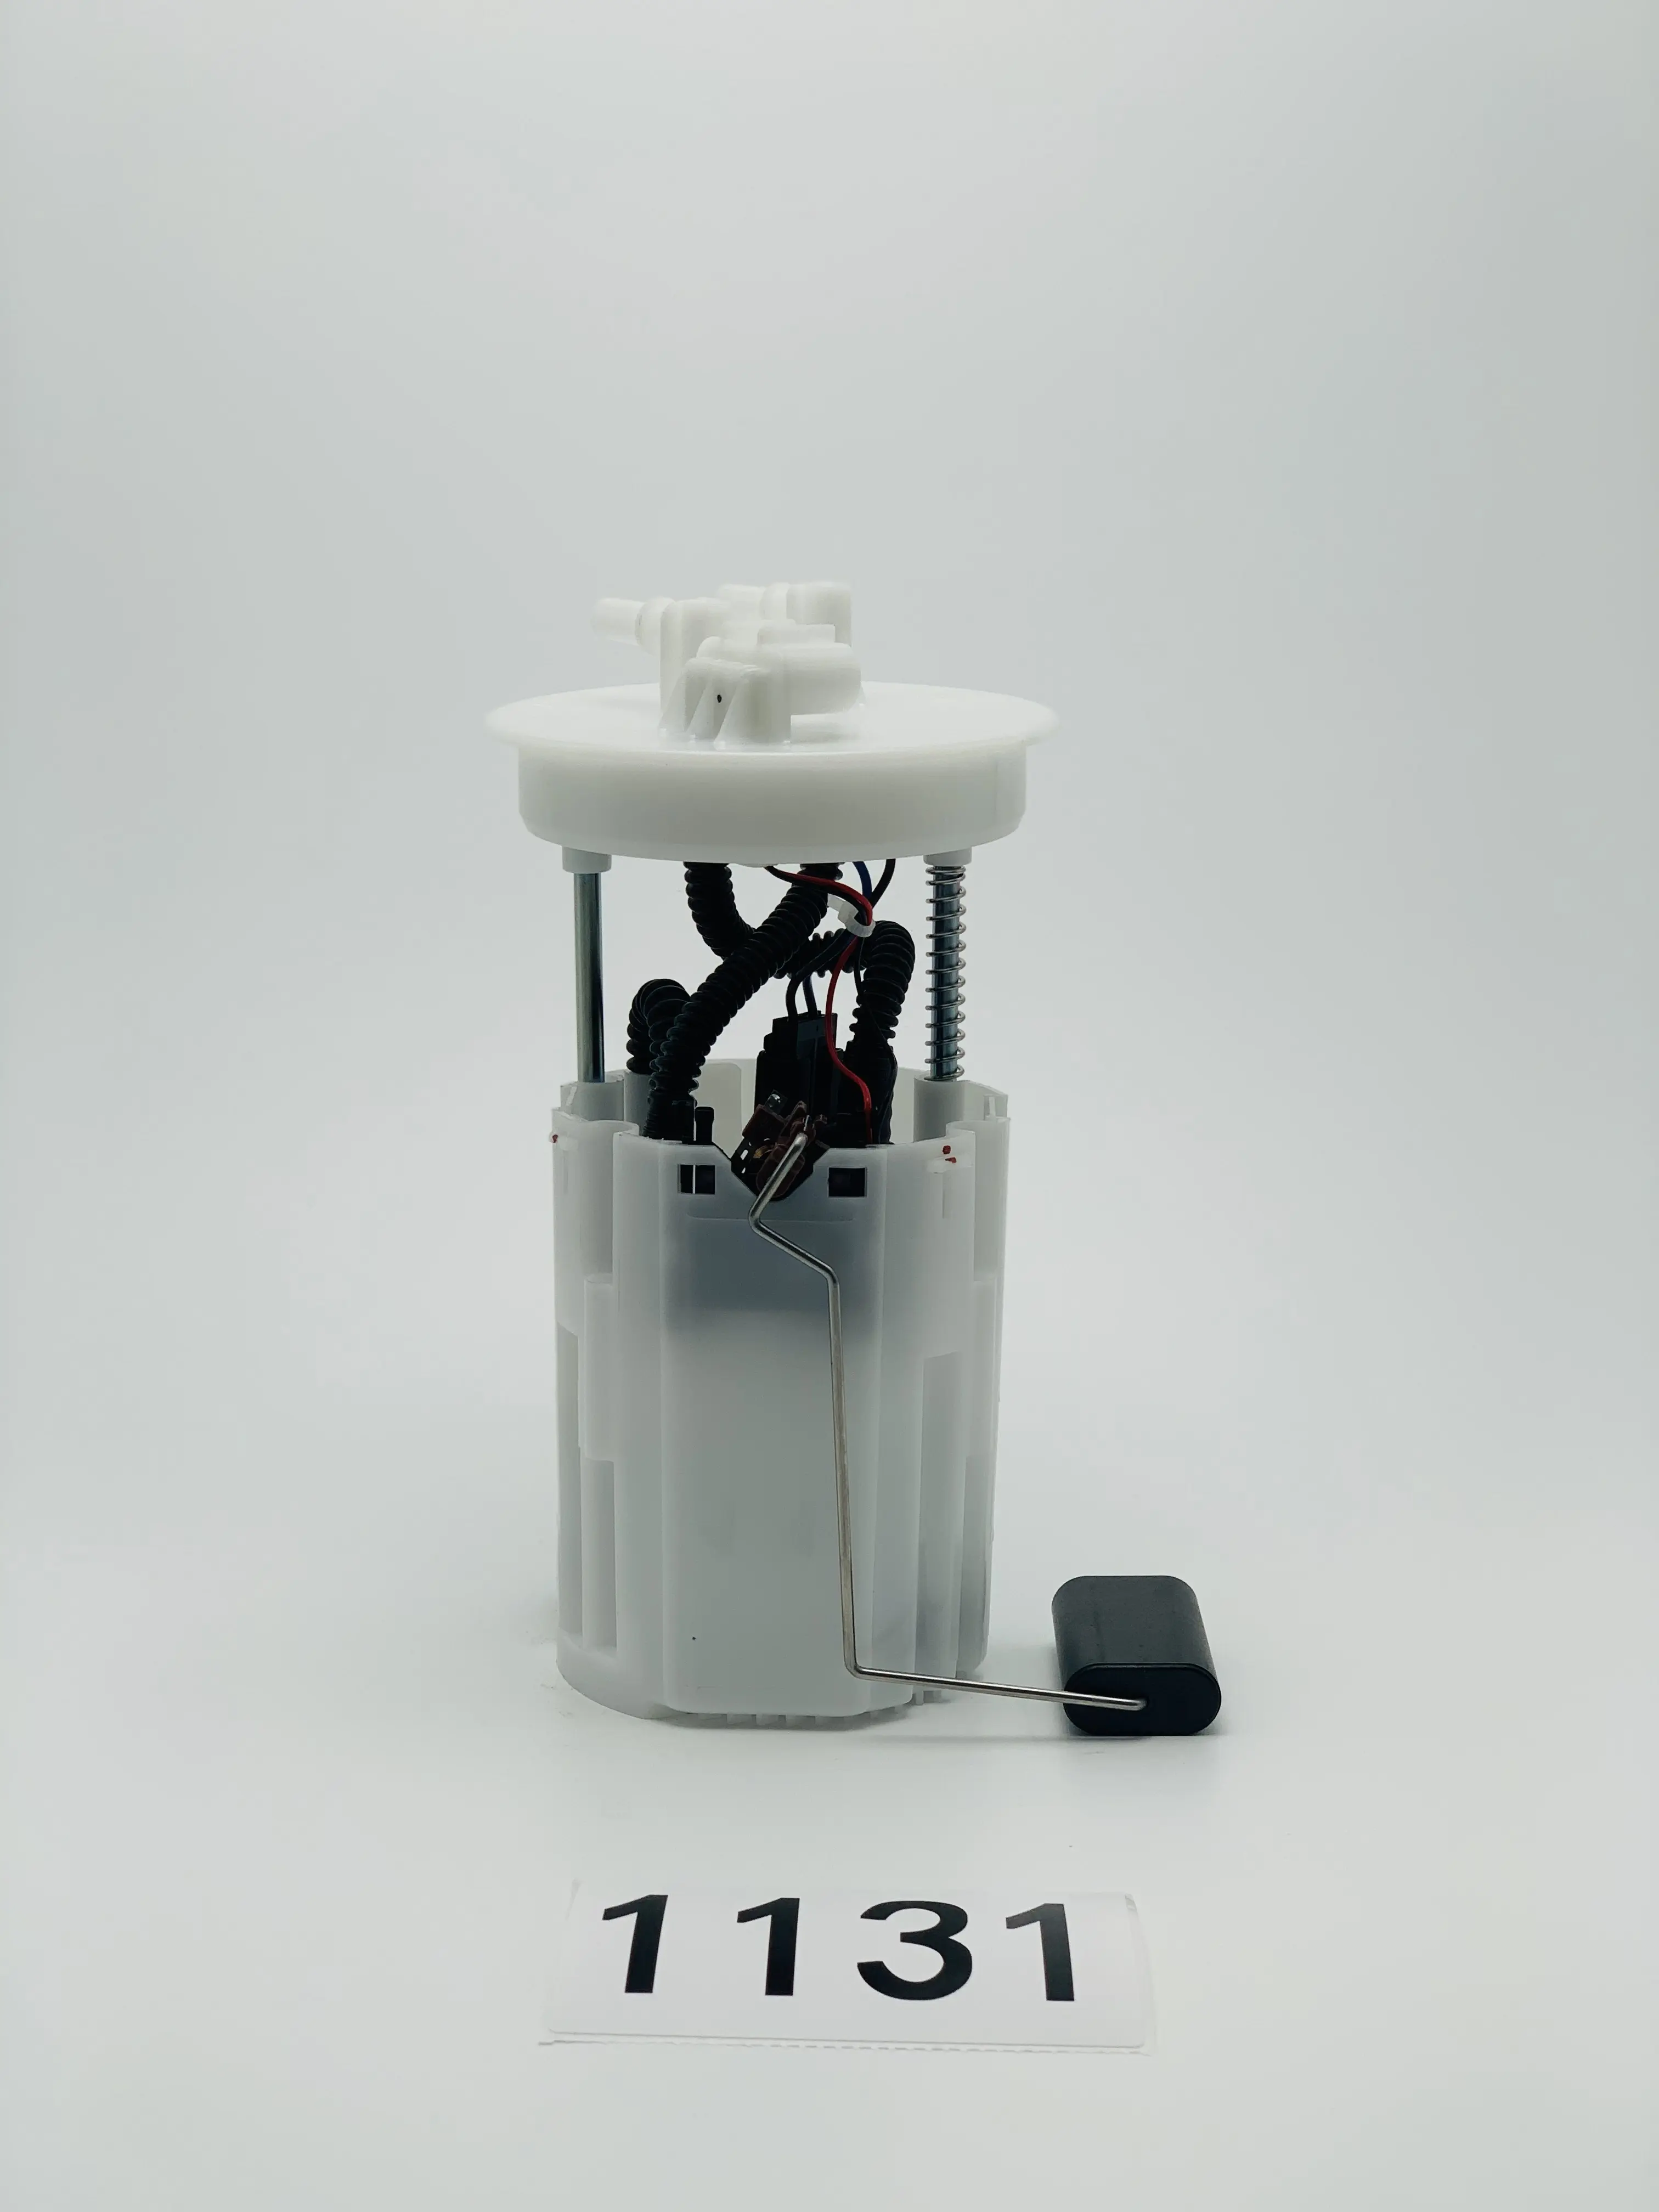 KS-A1131 HIGH Quality Fuel Pump Assembly for Geely Emgrand GS/GL